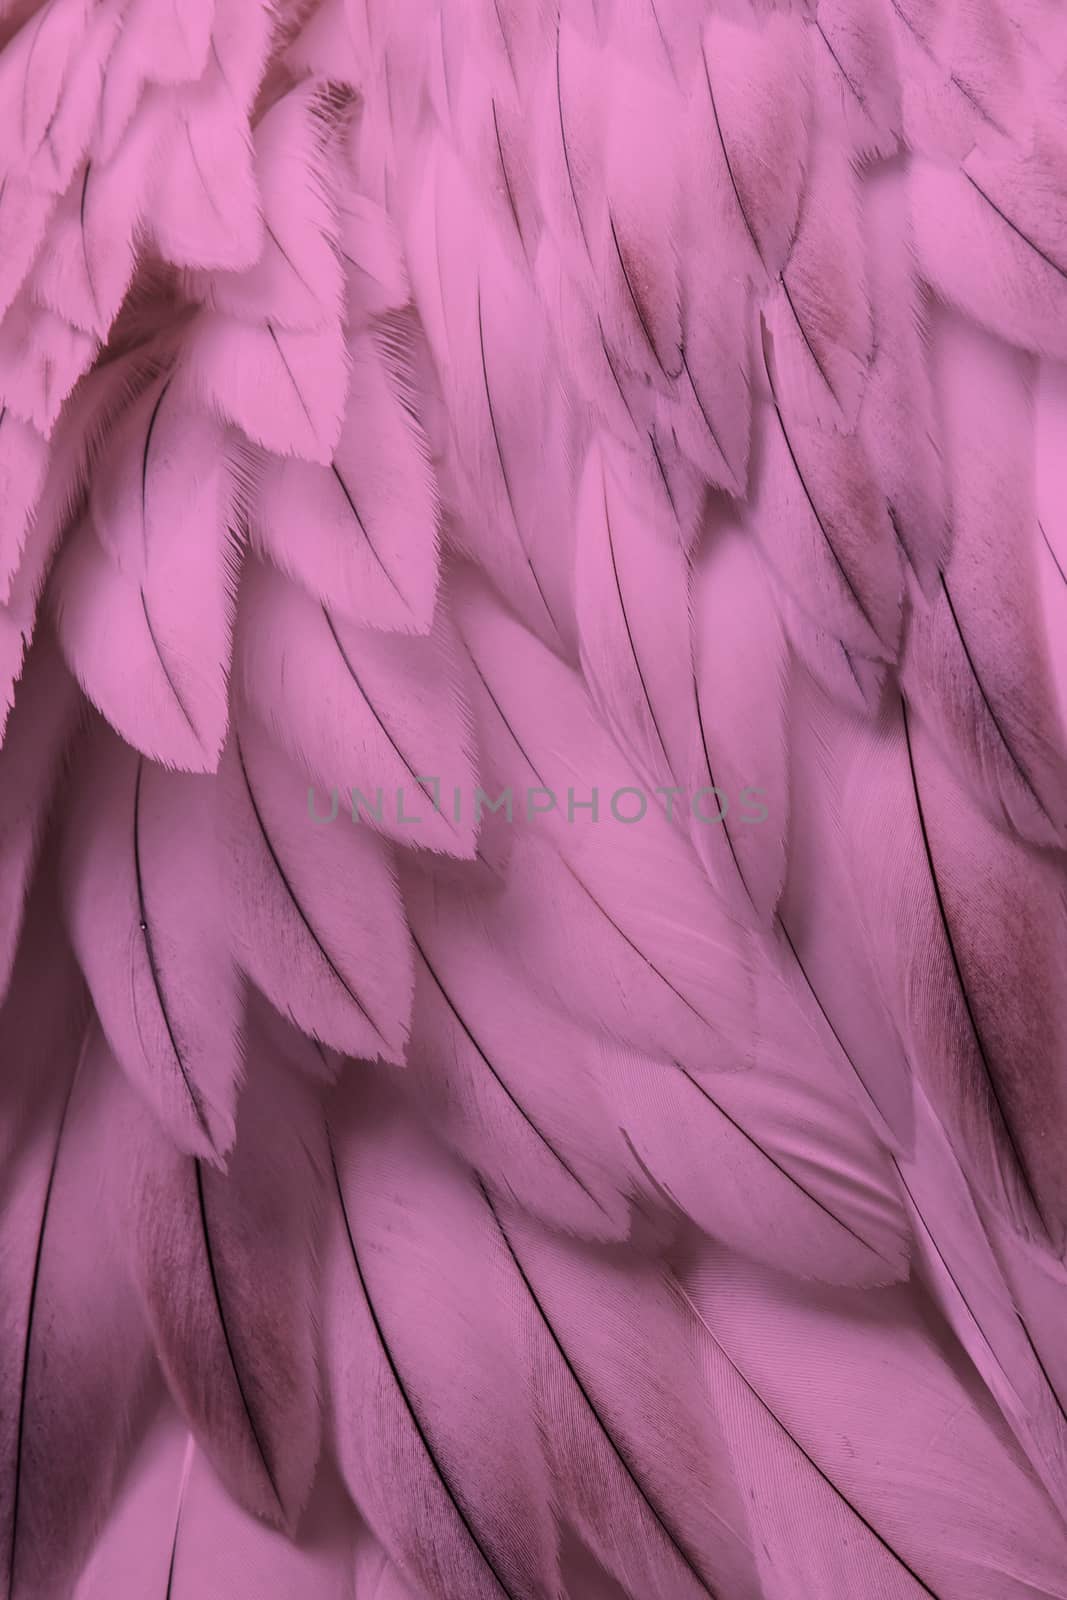 Pink fluffy feather closeup by michaklootwijk